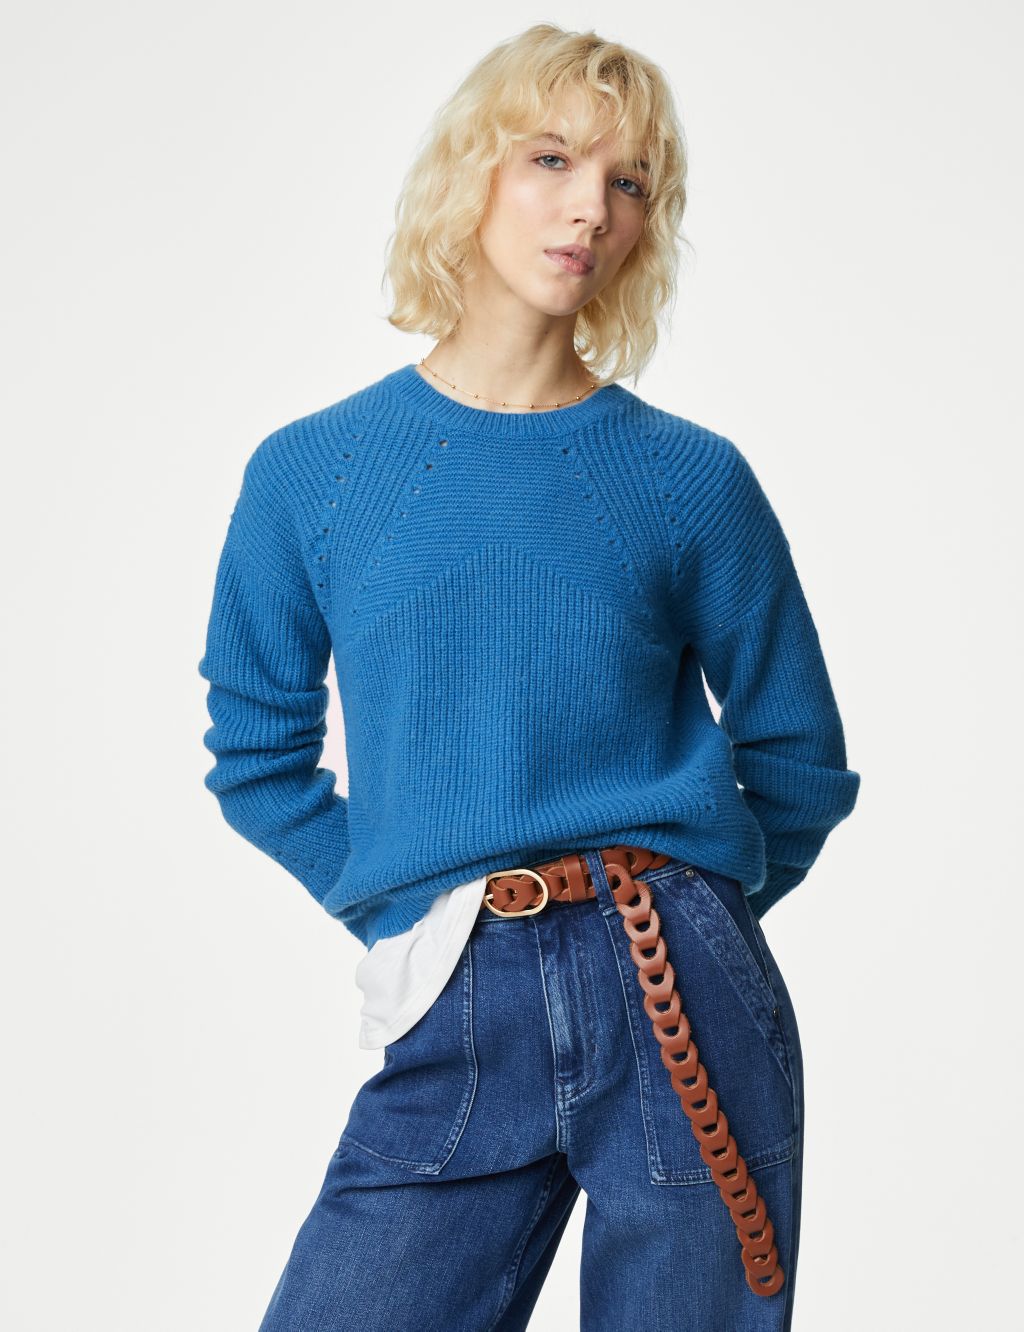 Pointelle Round Neck Jumper with Wool image 4